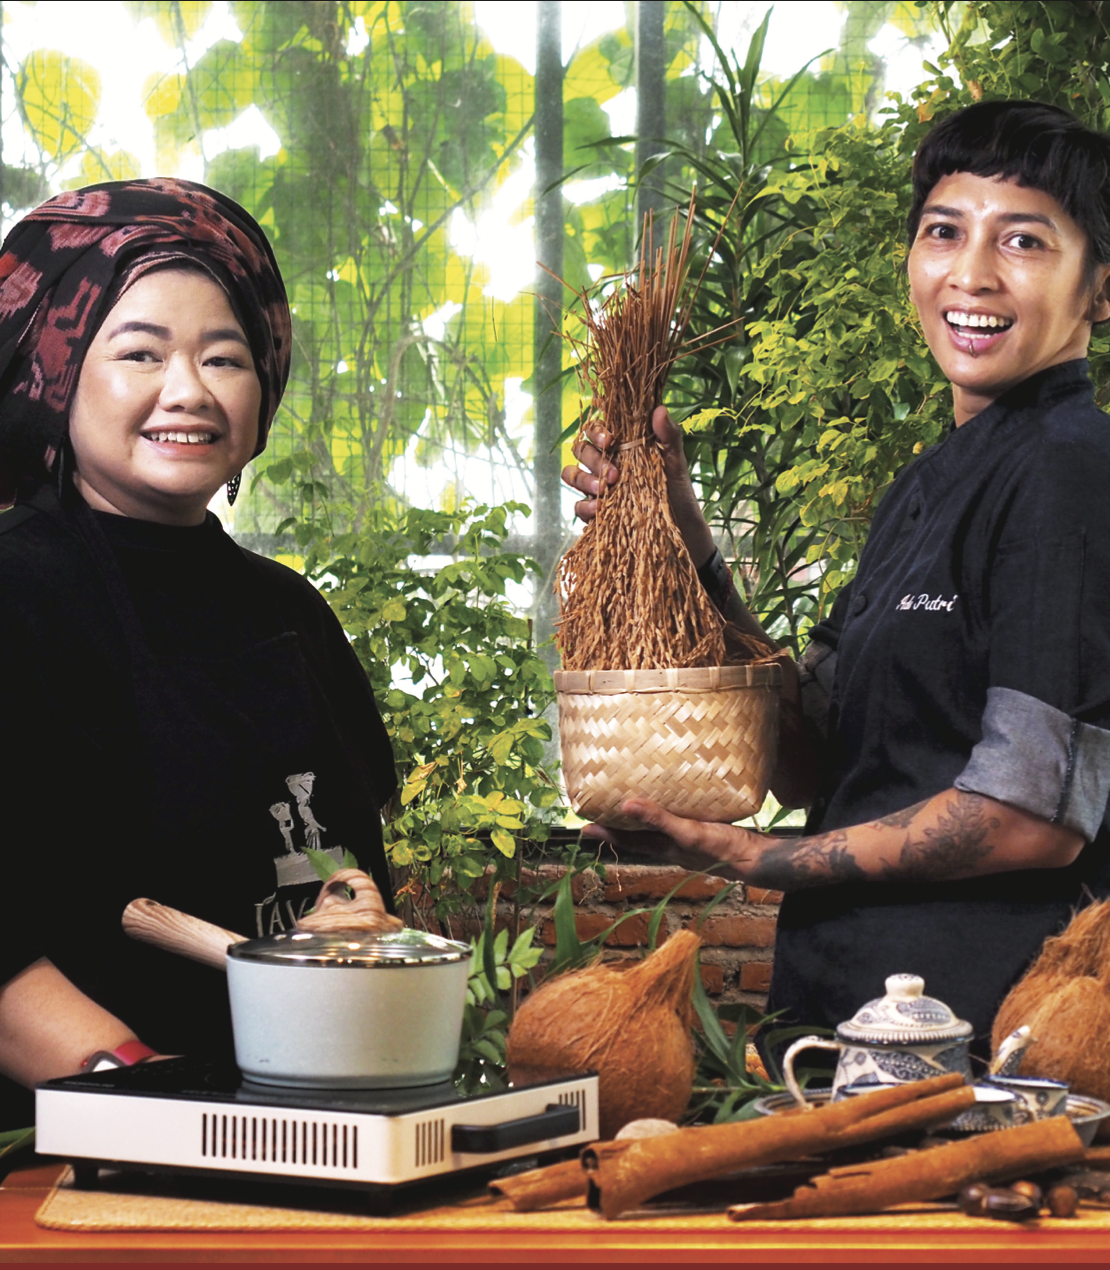 Two women wearing chef jackets prepare food with Indonesian ingredients in an outdoor kitchen.